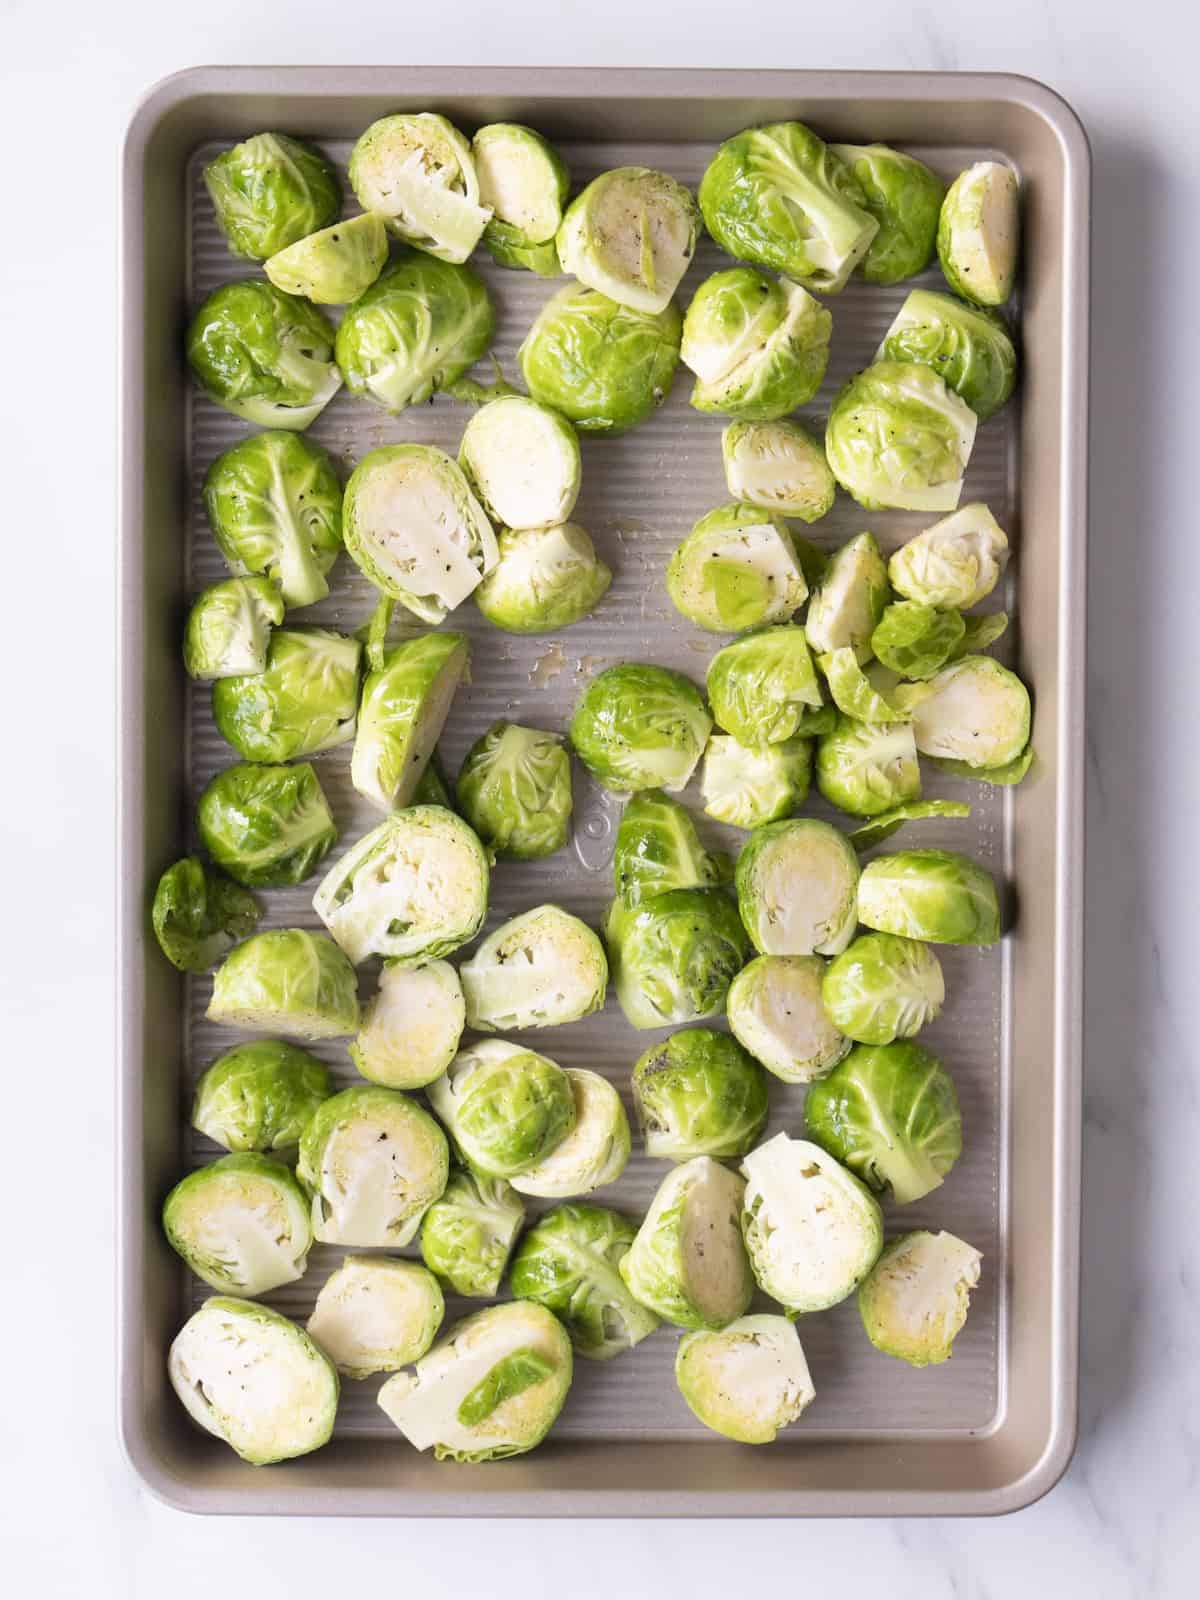 A sheet pan with brussels sprouts spread in a single layer tossed in olive oil.